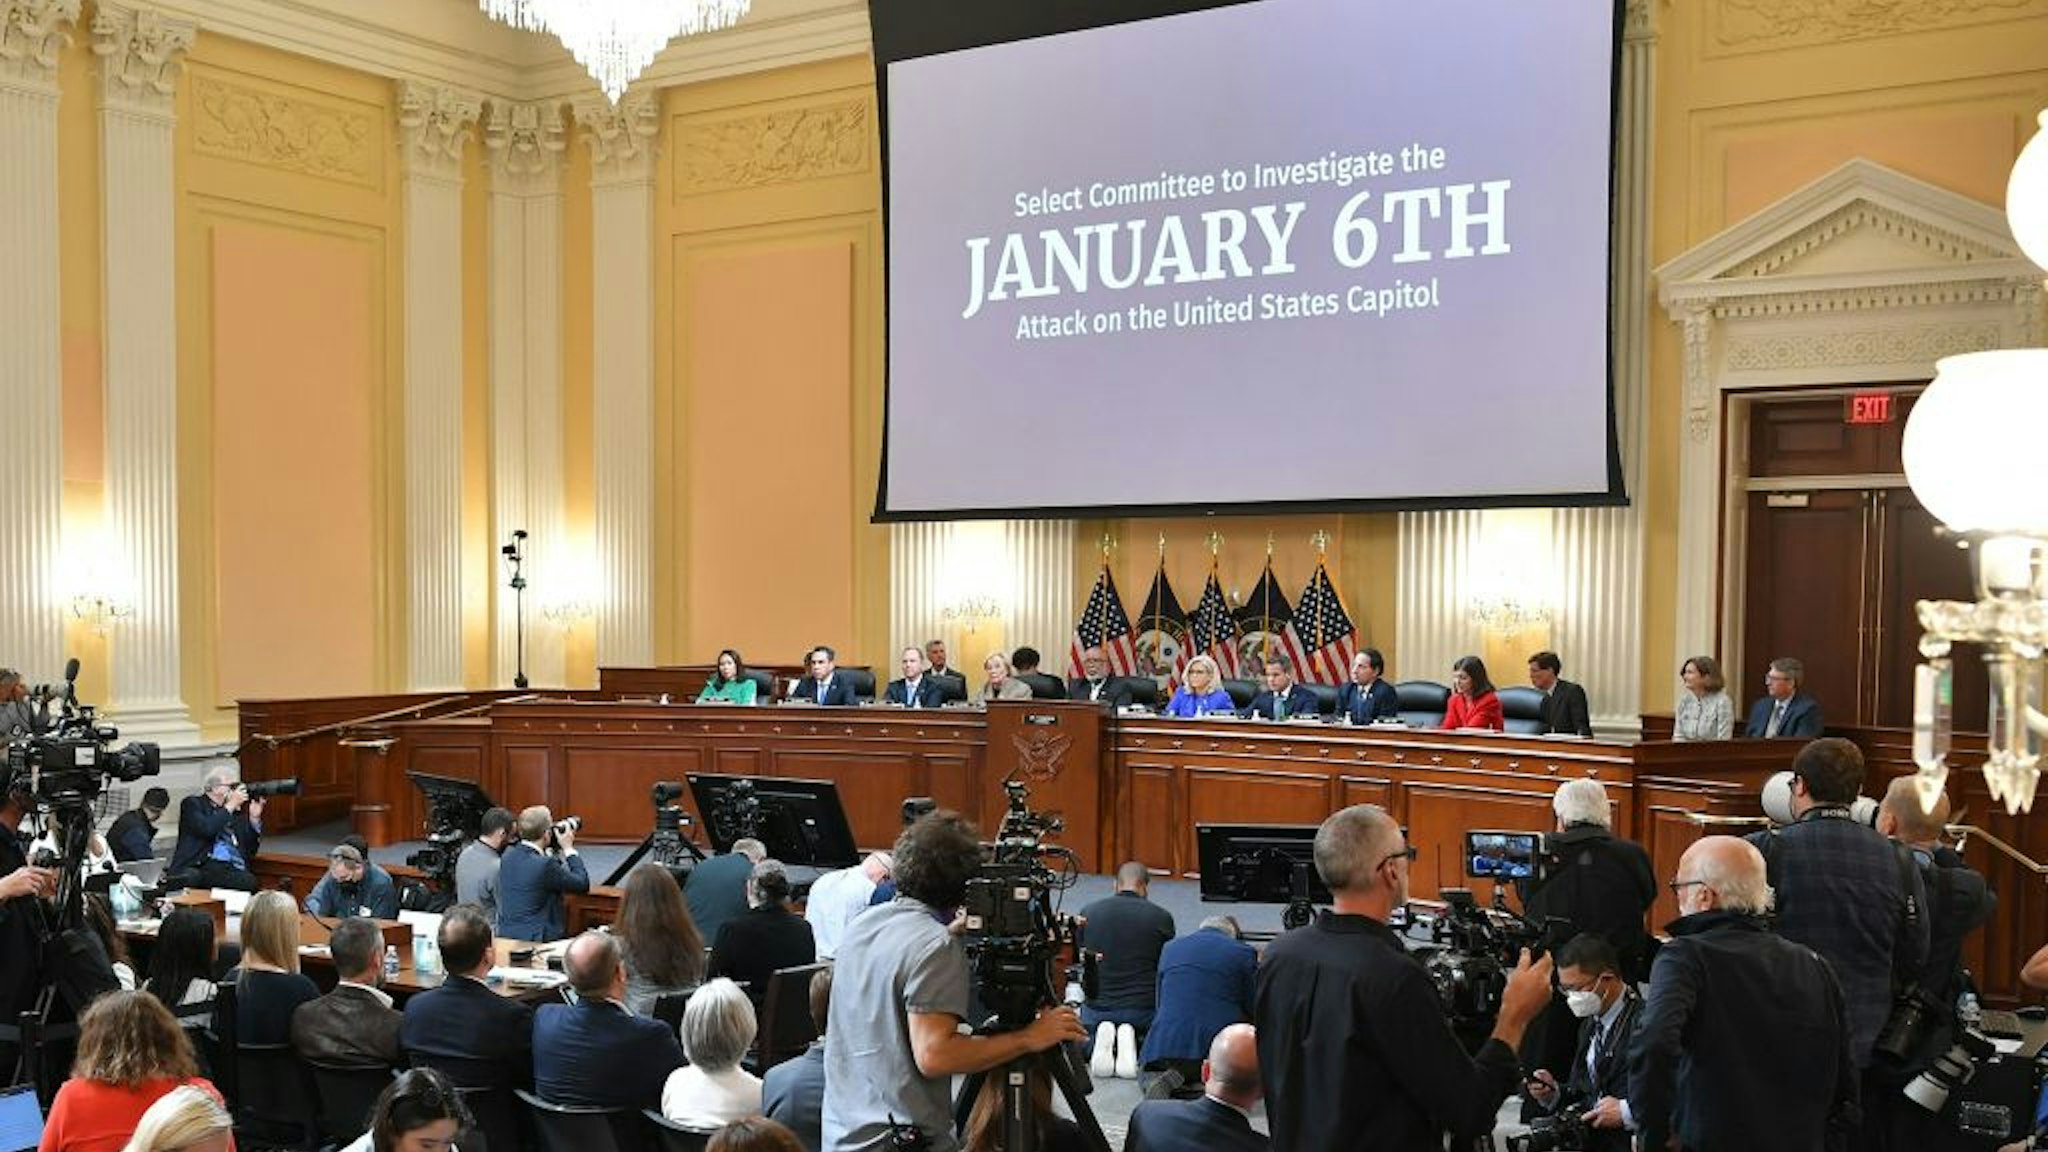 A general view shows a House Select Committee hearing to Investigate the January 6th Attack on the US Capitol, in the Cannon House Office Building on Capitol Hill in Washington, DC on June 9, 2022. (Photo by MANDEL NGAN / POOL / AFP) (Photo by MANDEL NGAN/POOL/AFP via Getty Images)